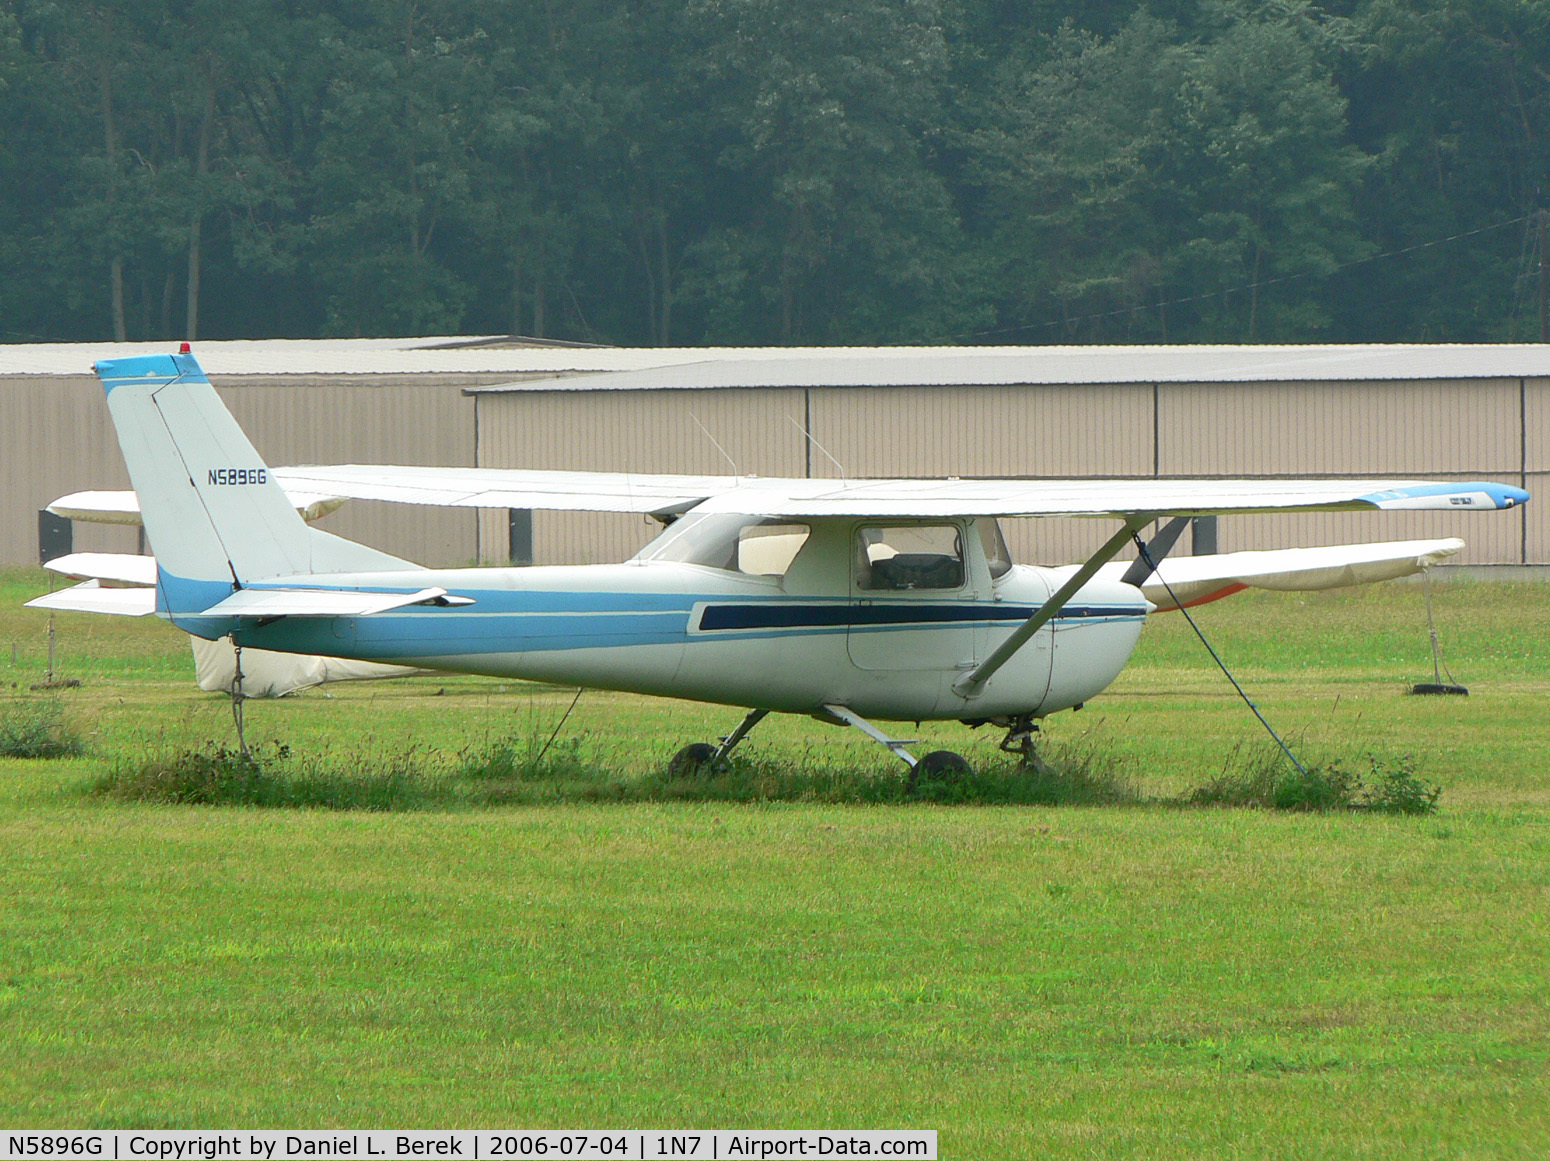 N5896G, 1969 Cessna 150K C/N 15071396, A 1969 Cessna 150 enjoys some rest on Indpendence Day at Blairstown.